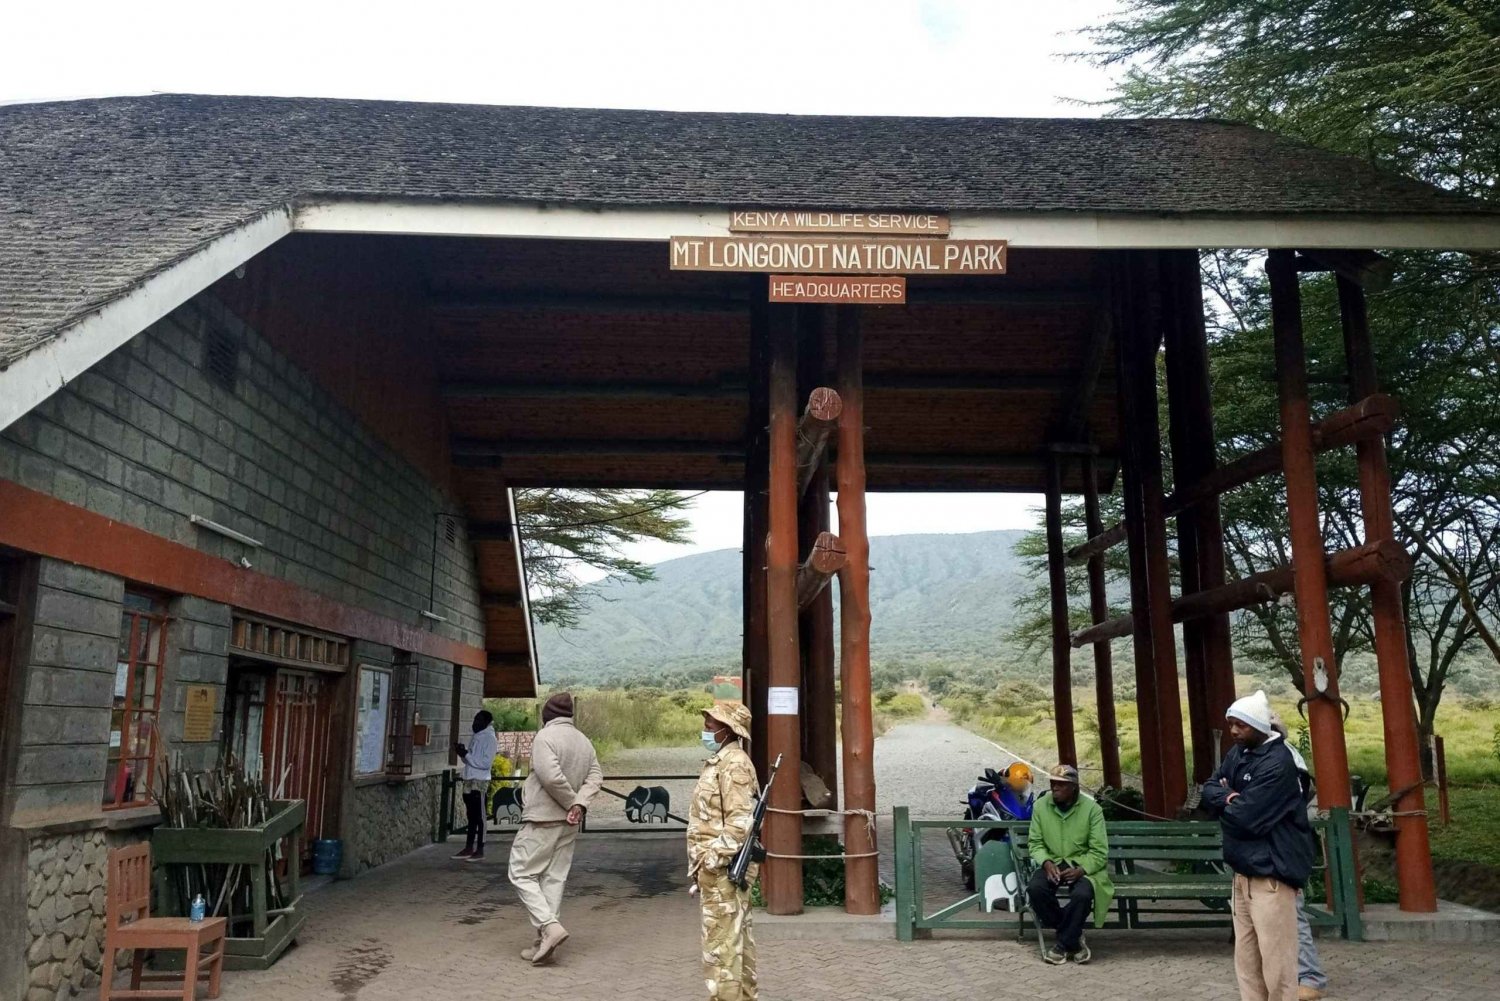 Day tour to Mount Longonot